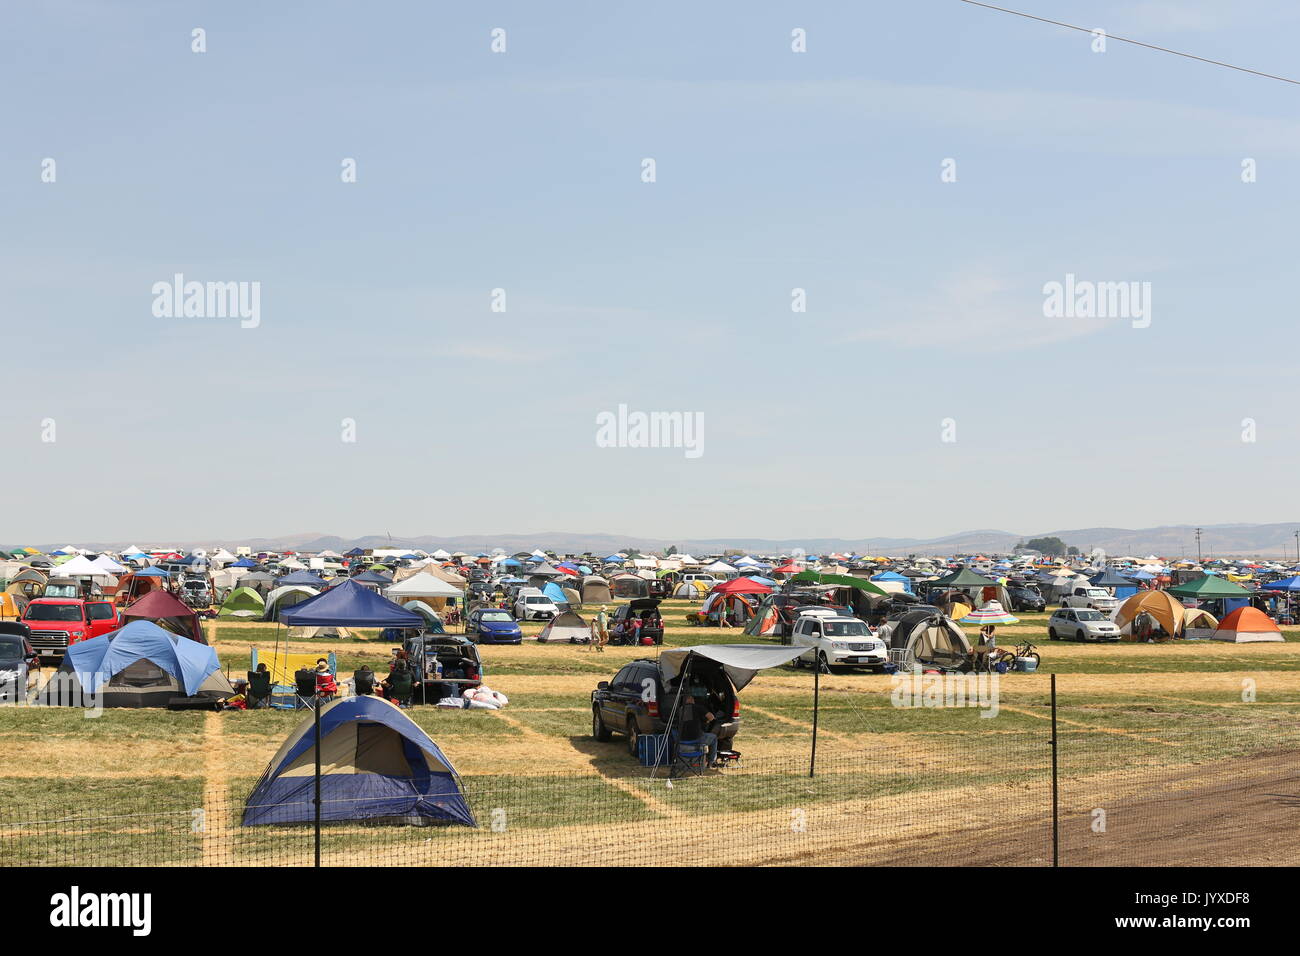 Madras, Oregon, USA. 19th Aug, 2017. Along route 97 and 26, in the path of the full solar eclipse, temporary tent cities have been erected. Hundred of thousands of people are expected to view the full solar eclipse. Credit: Marcel Siegle/Alamy Live News Stock Photo